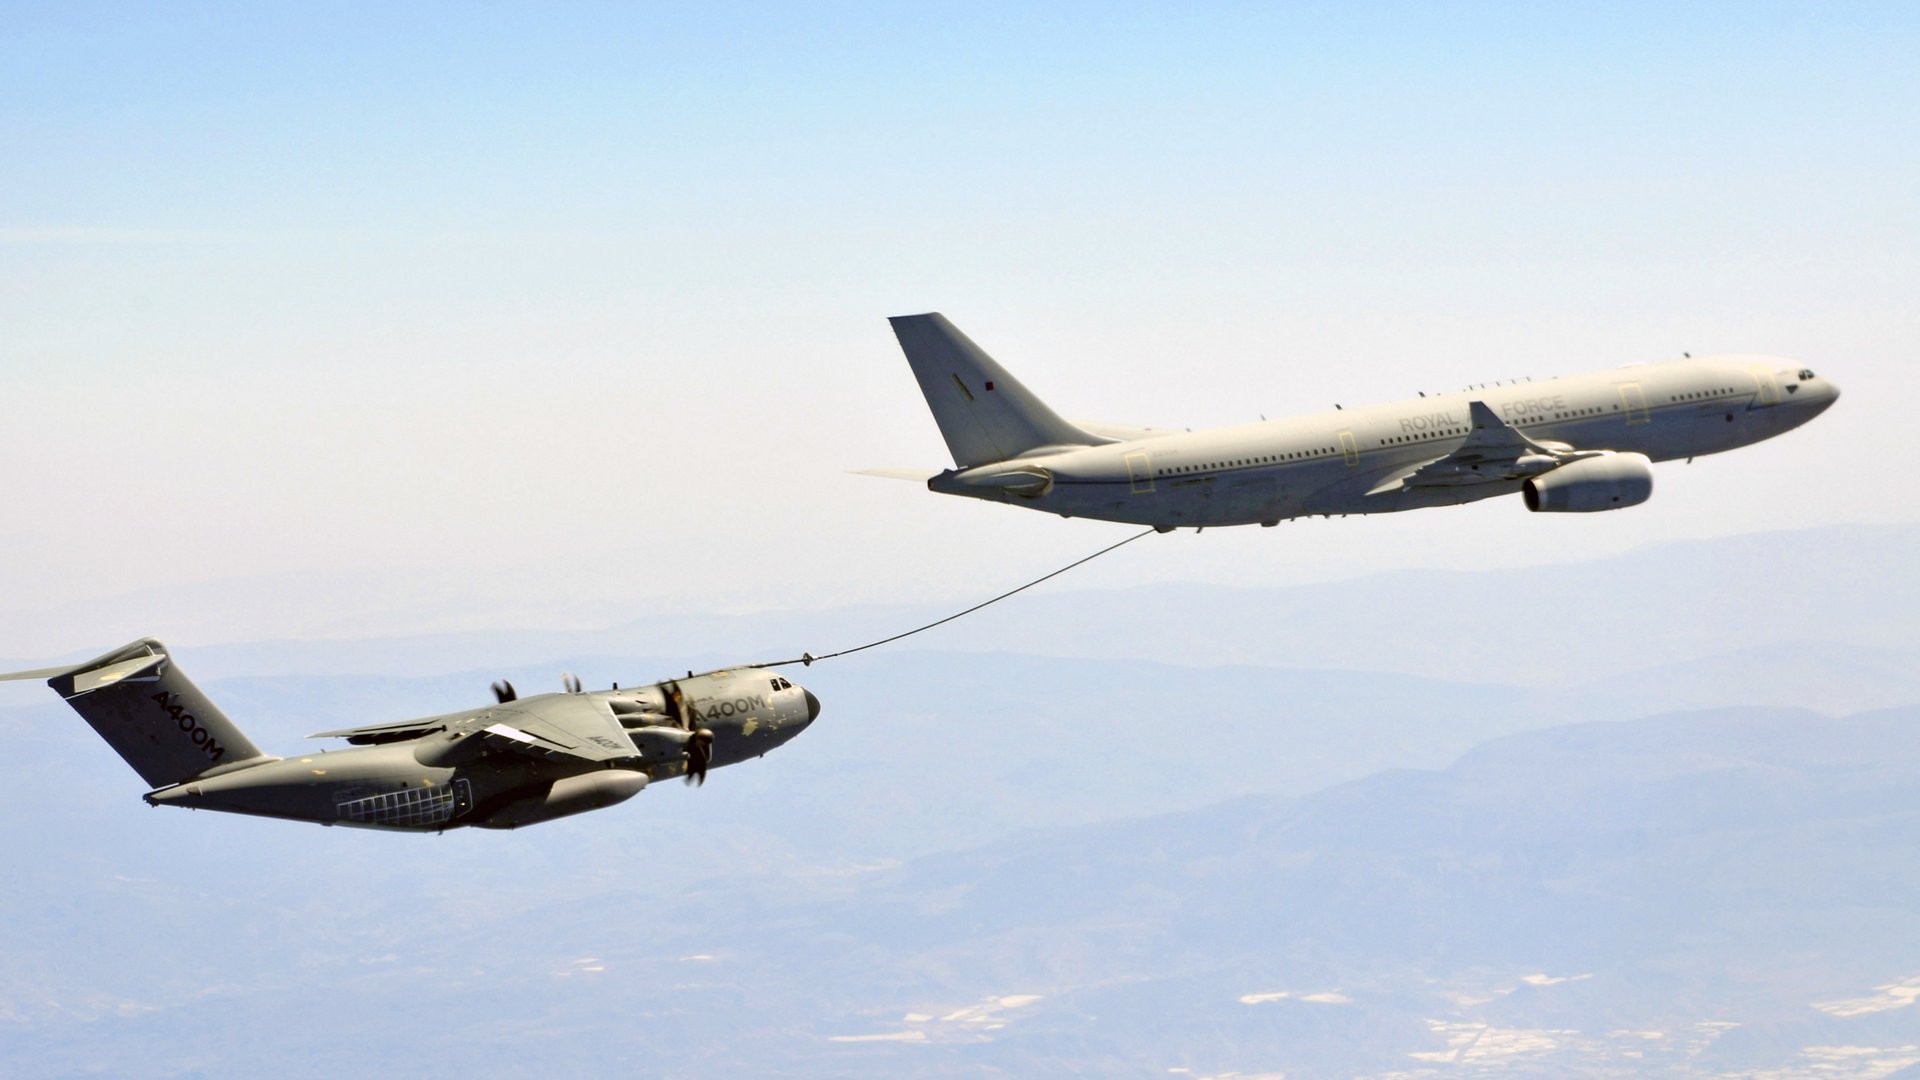 A330 MRTT Voyager Achieves Clearance to Refuel A400M Aircraft